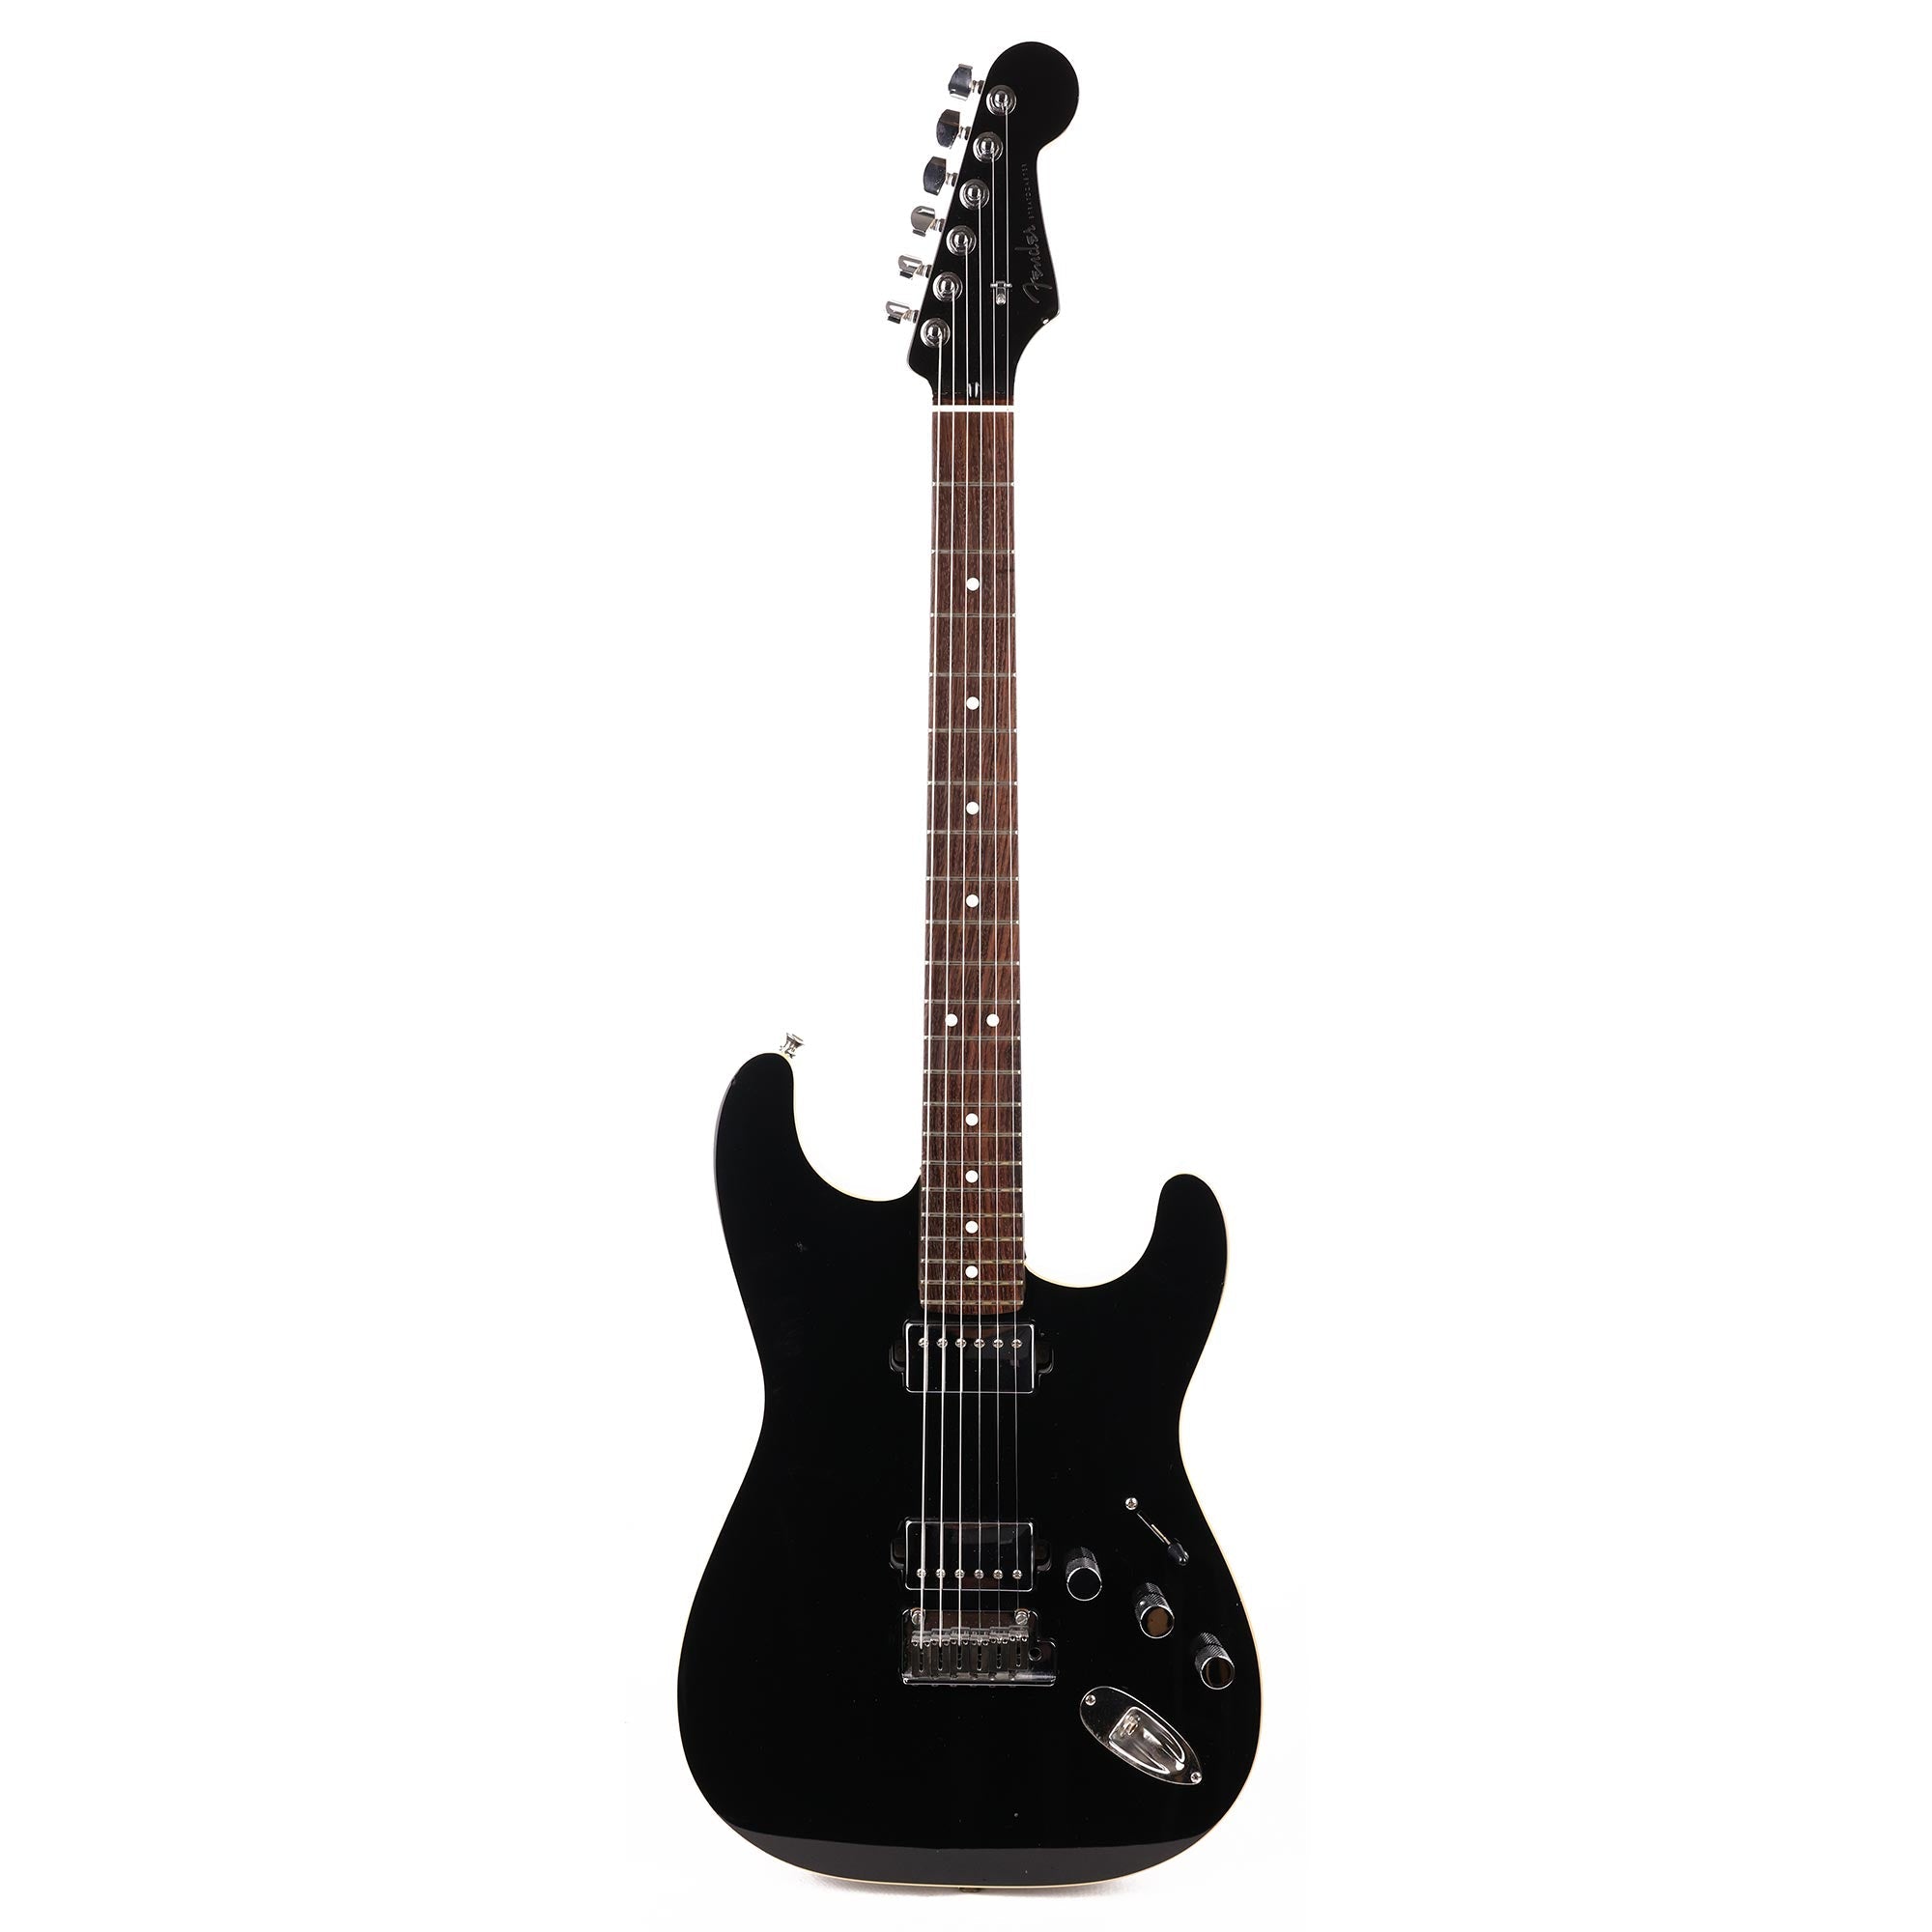 Fender Made in Japan Modern Stratocaster HH Black 2019 | The Music Zoo